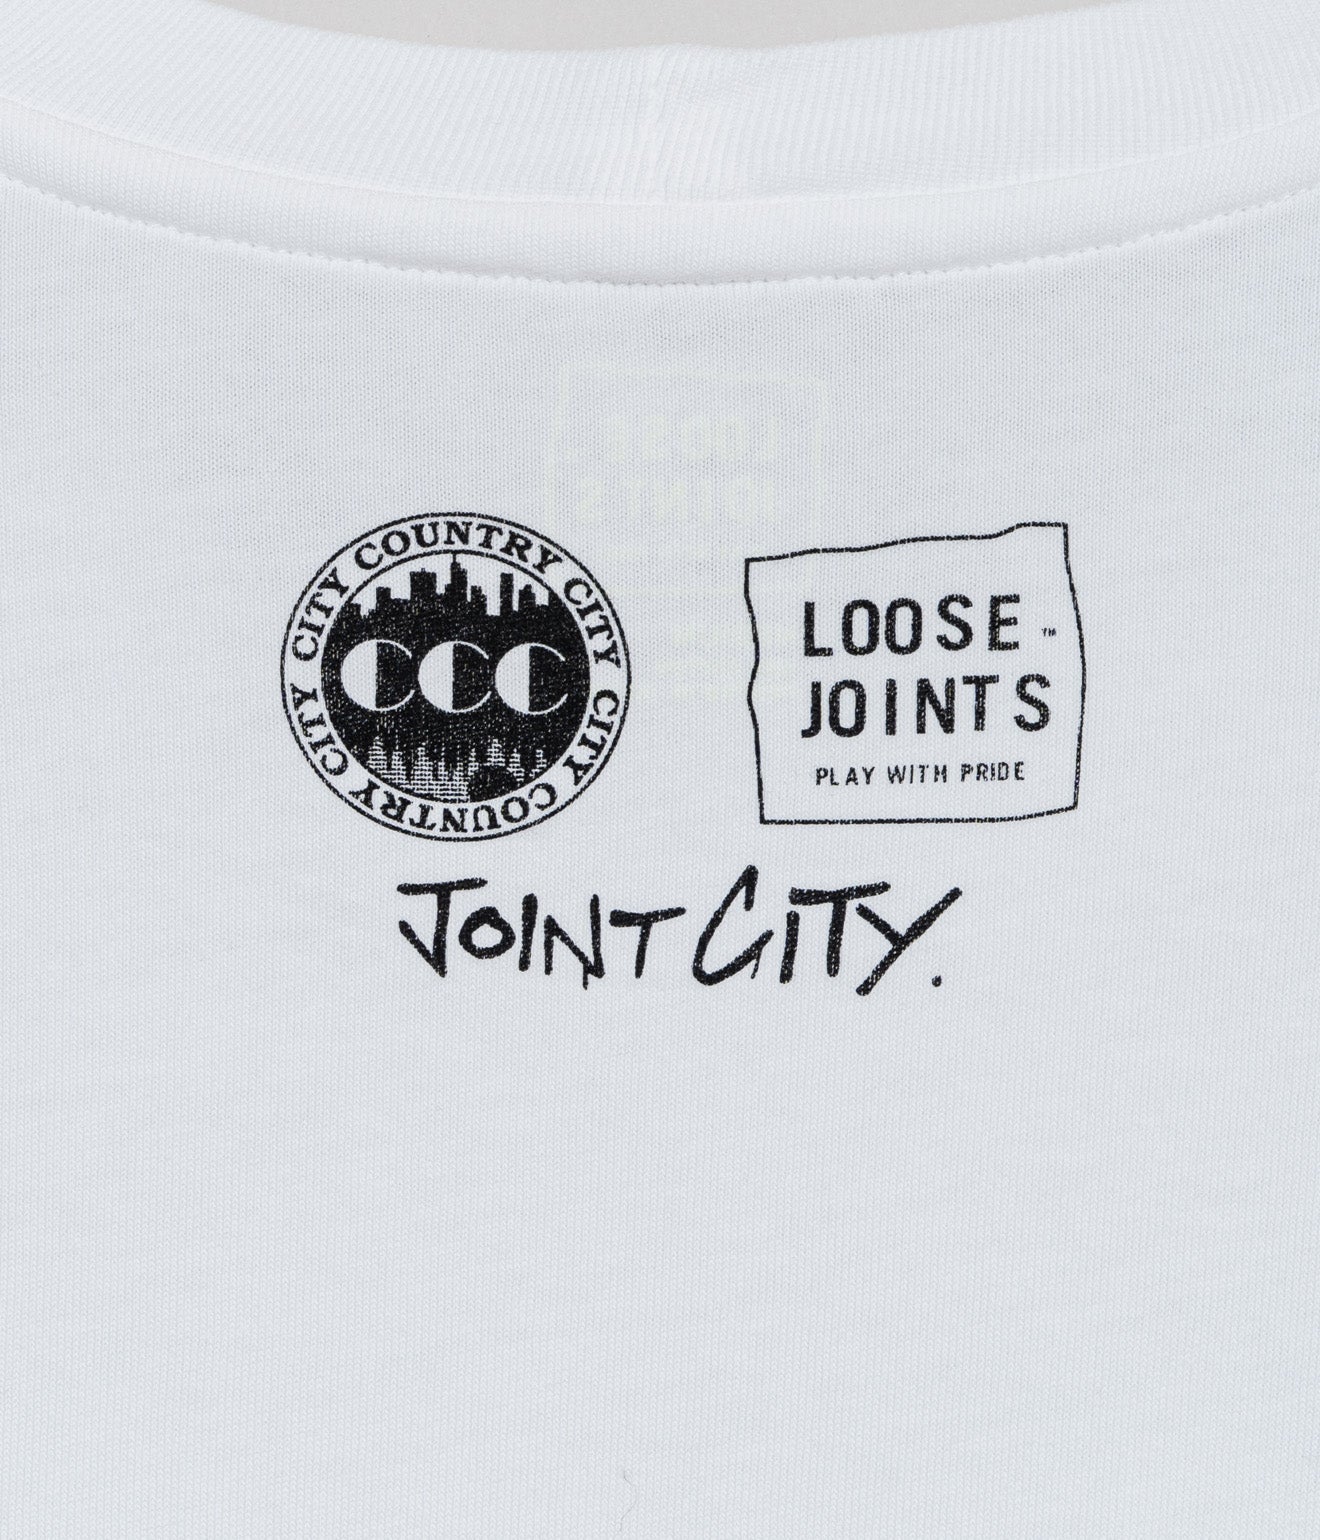 LOOSEJOINTS "CITY COUNTRY CITY - 'Joints City ' S/S TEE" - WEAREALLANIMALS